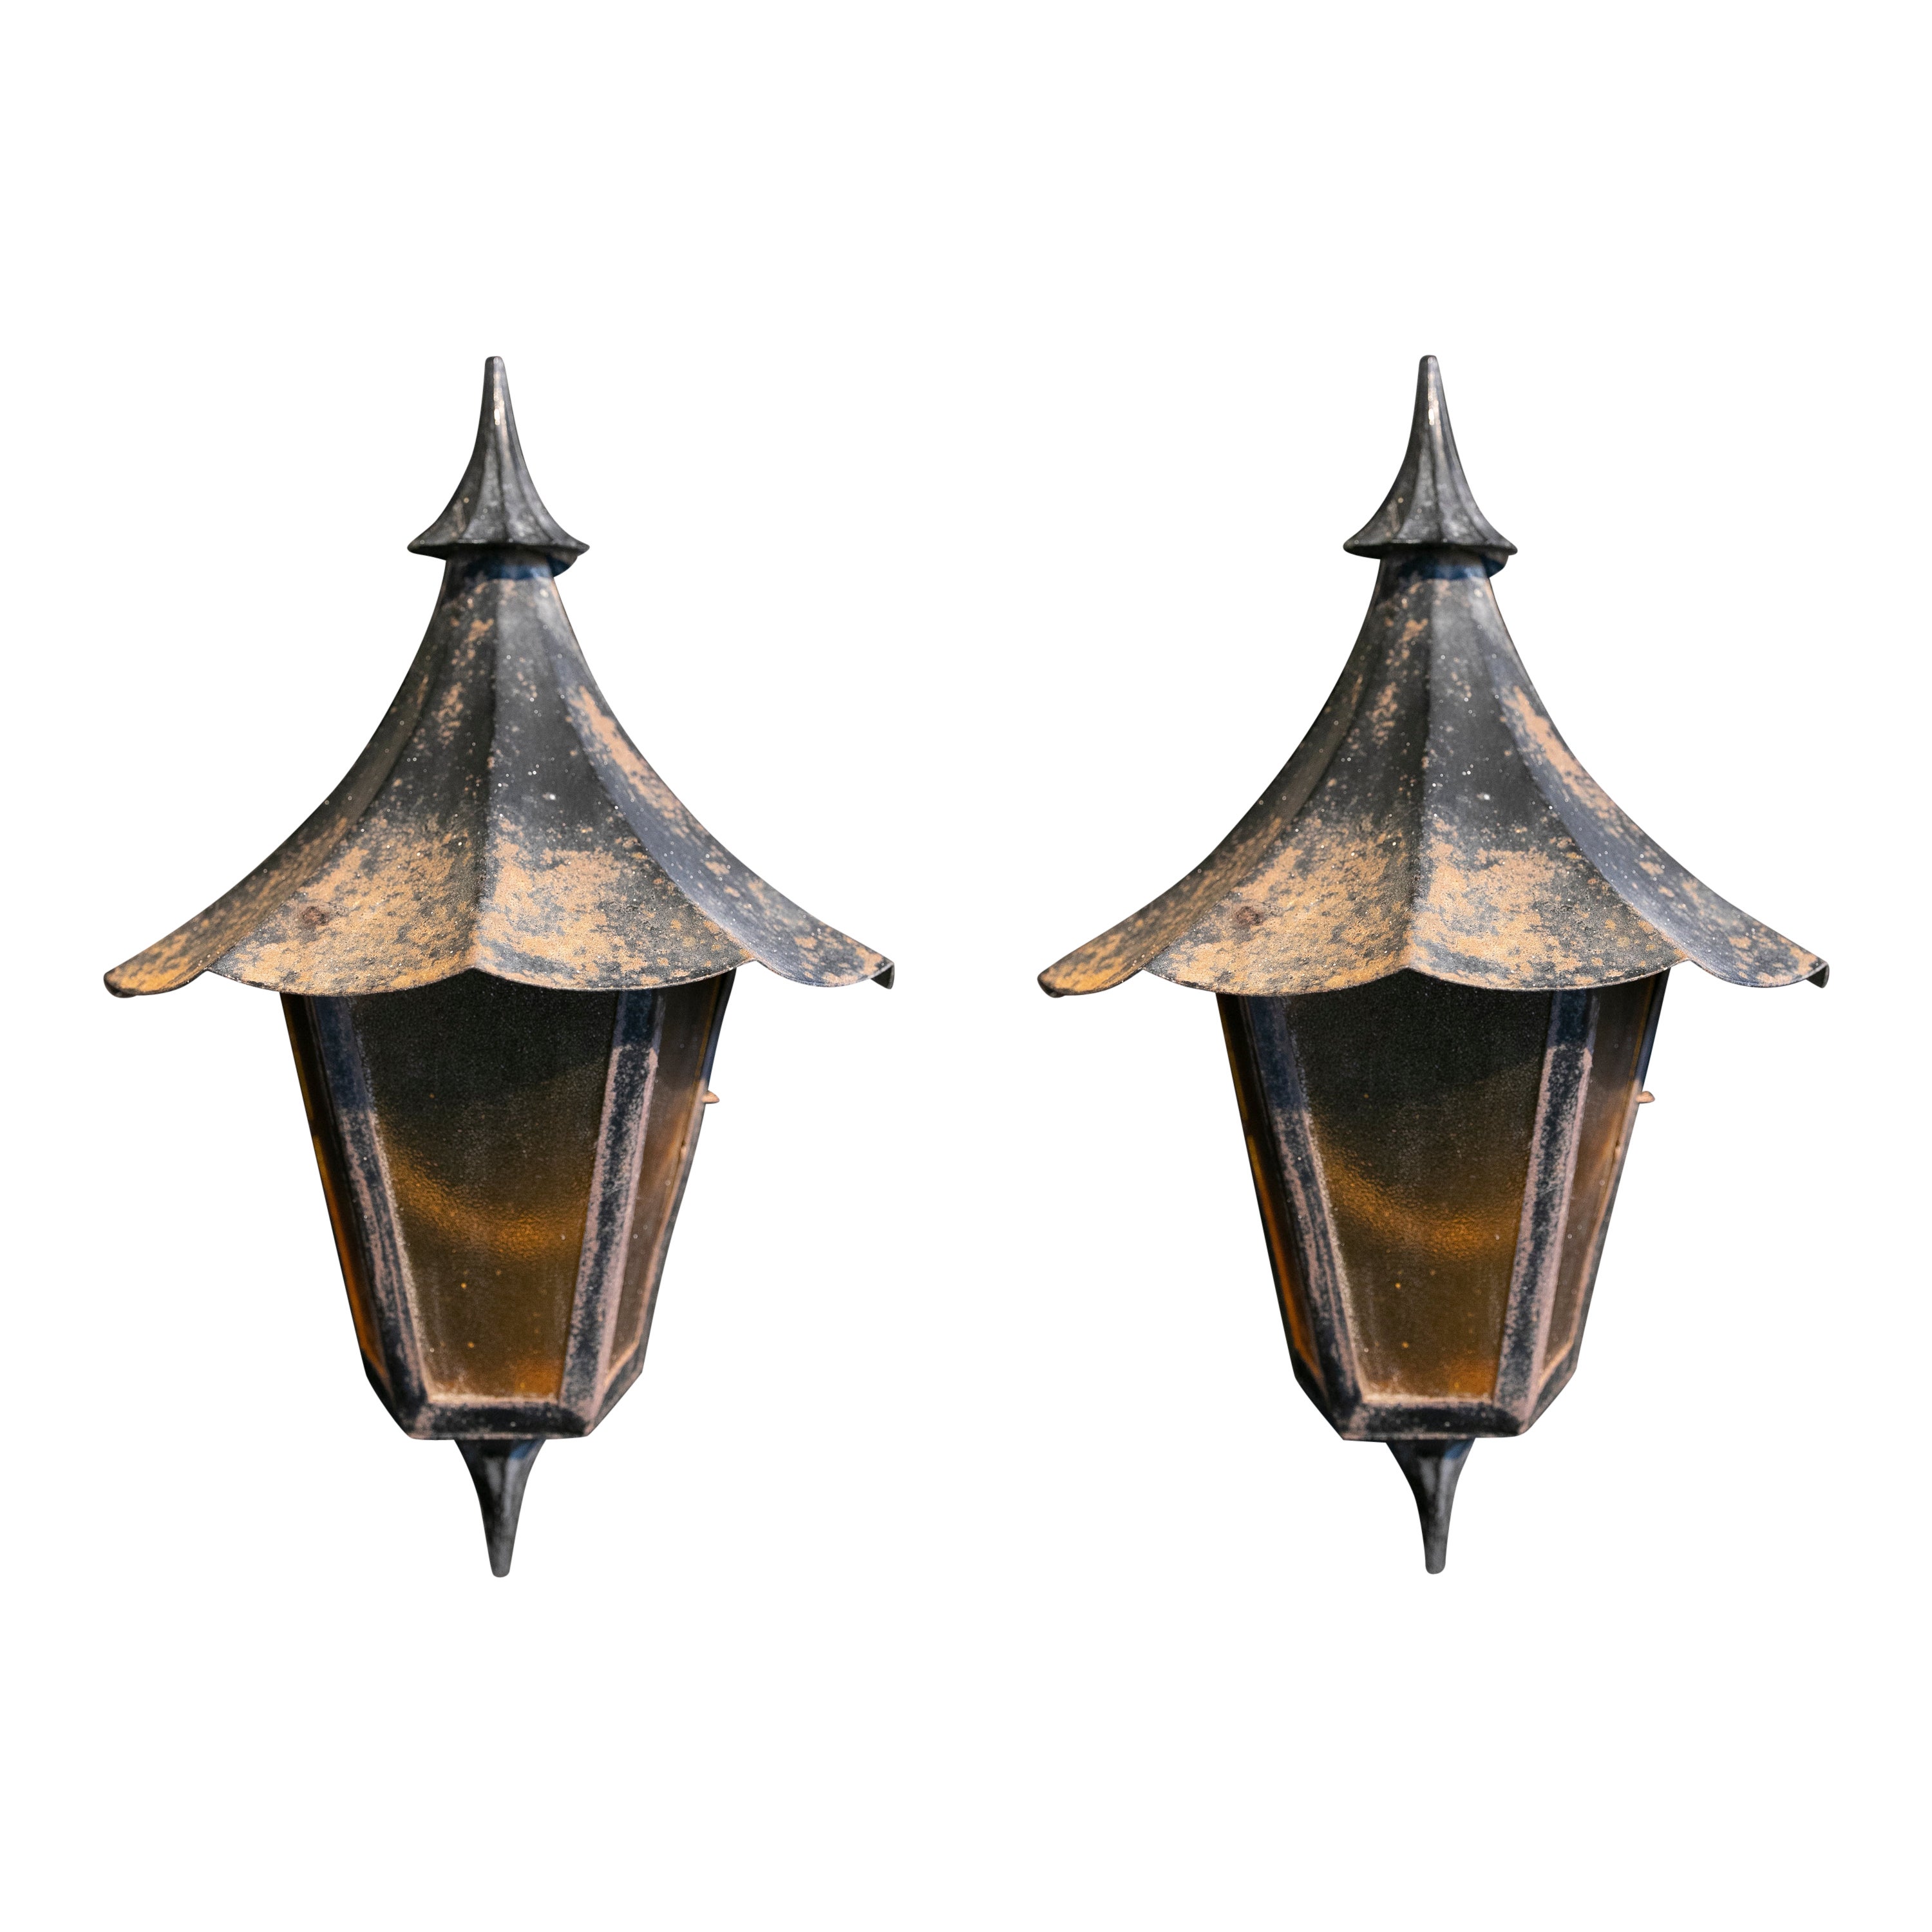 1970s Pair of Iron Wall Lamps with Their Original Glass